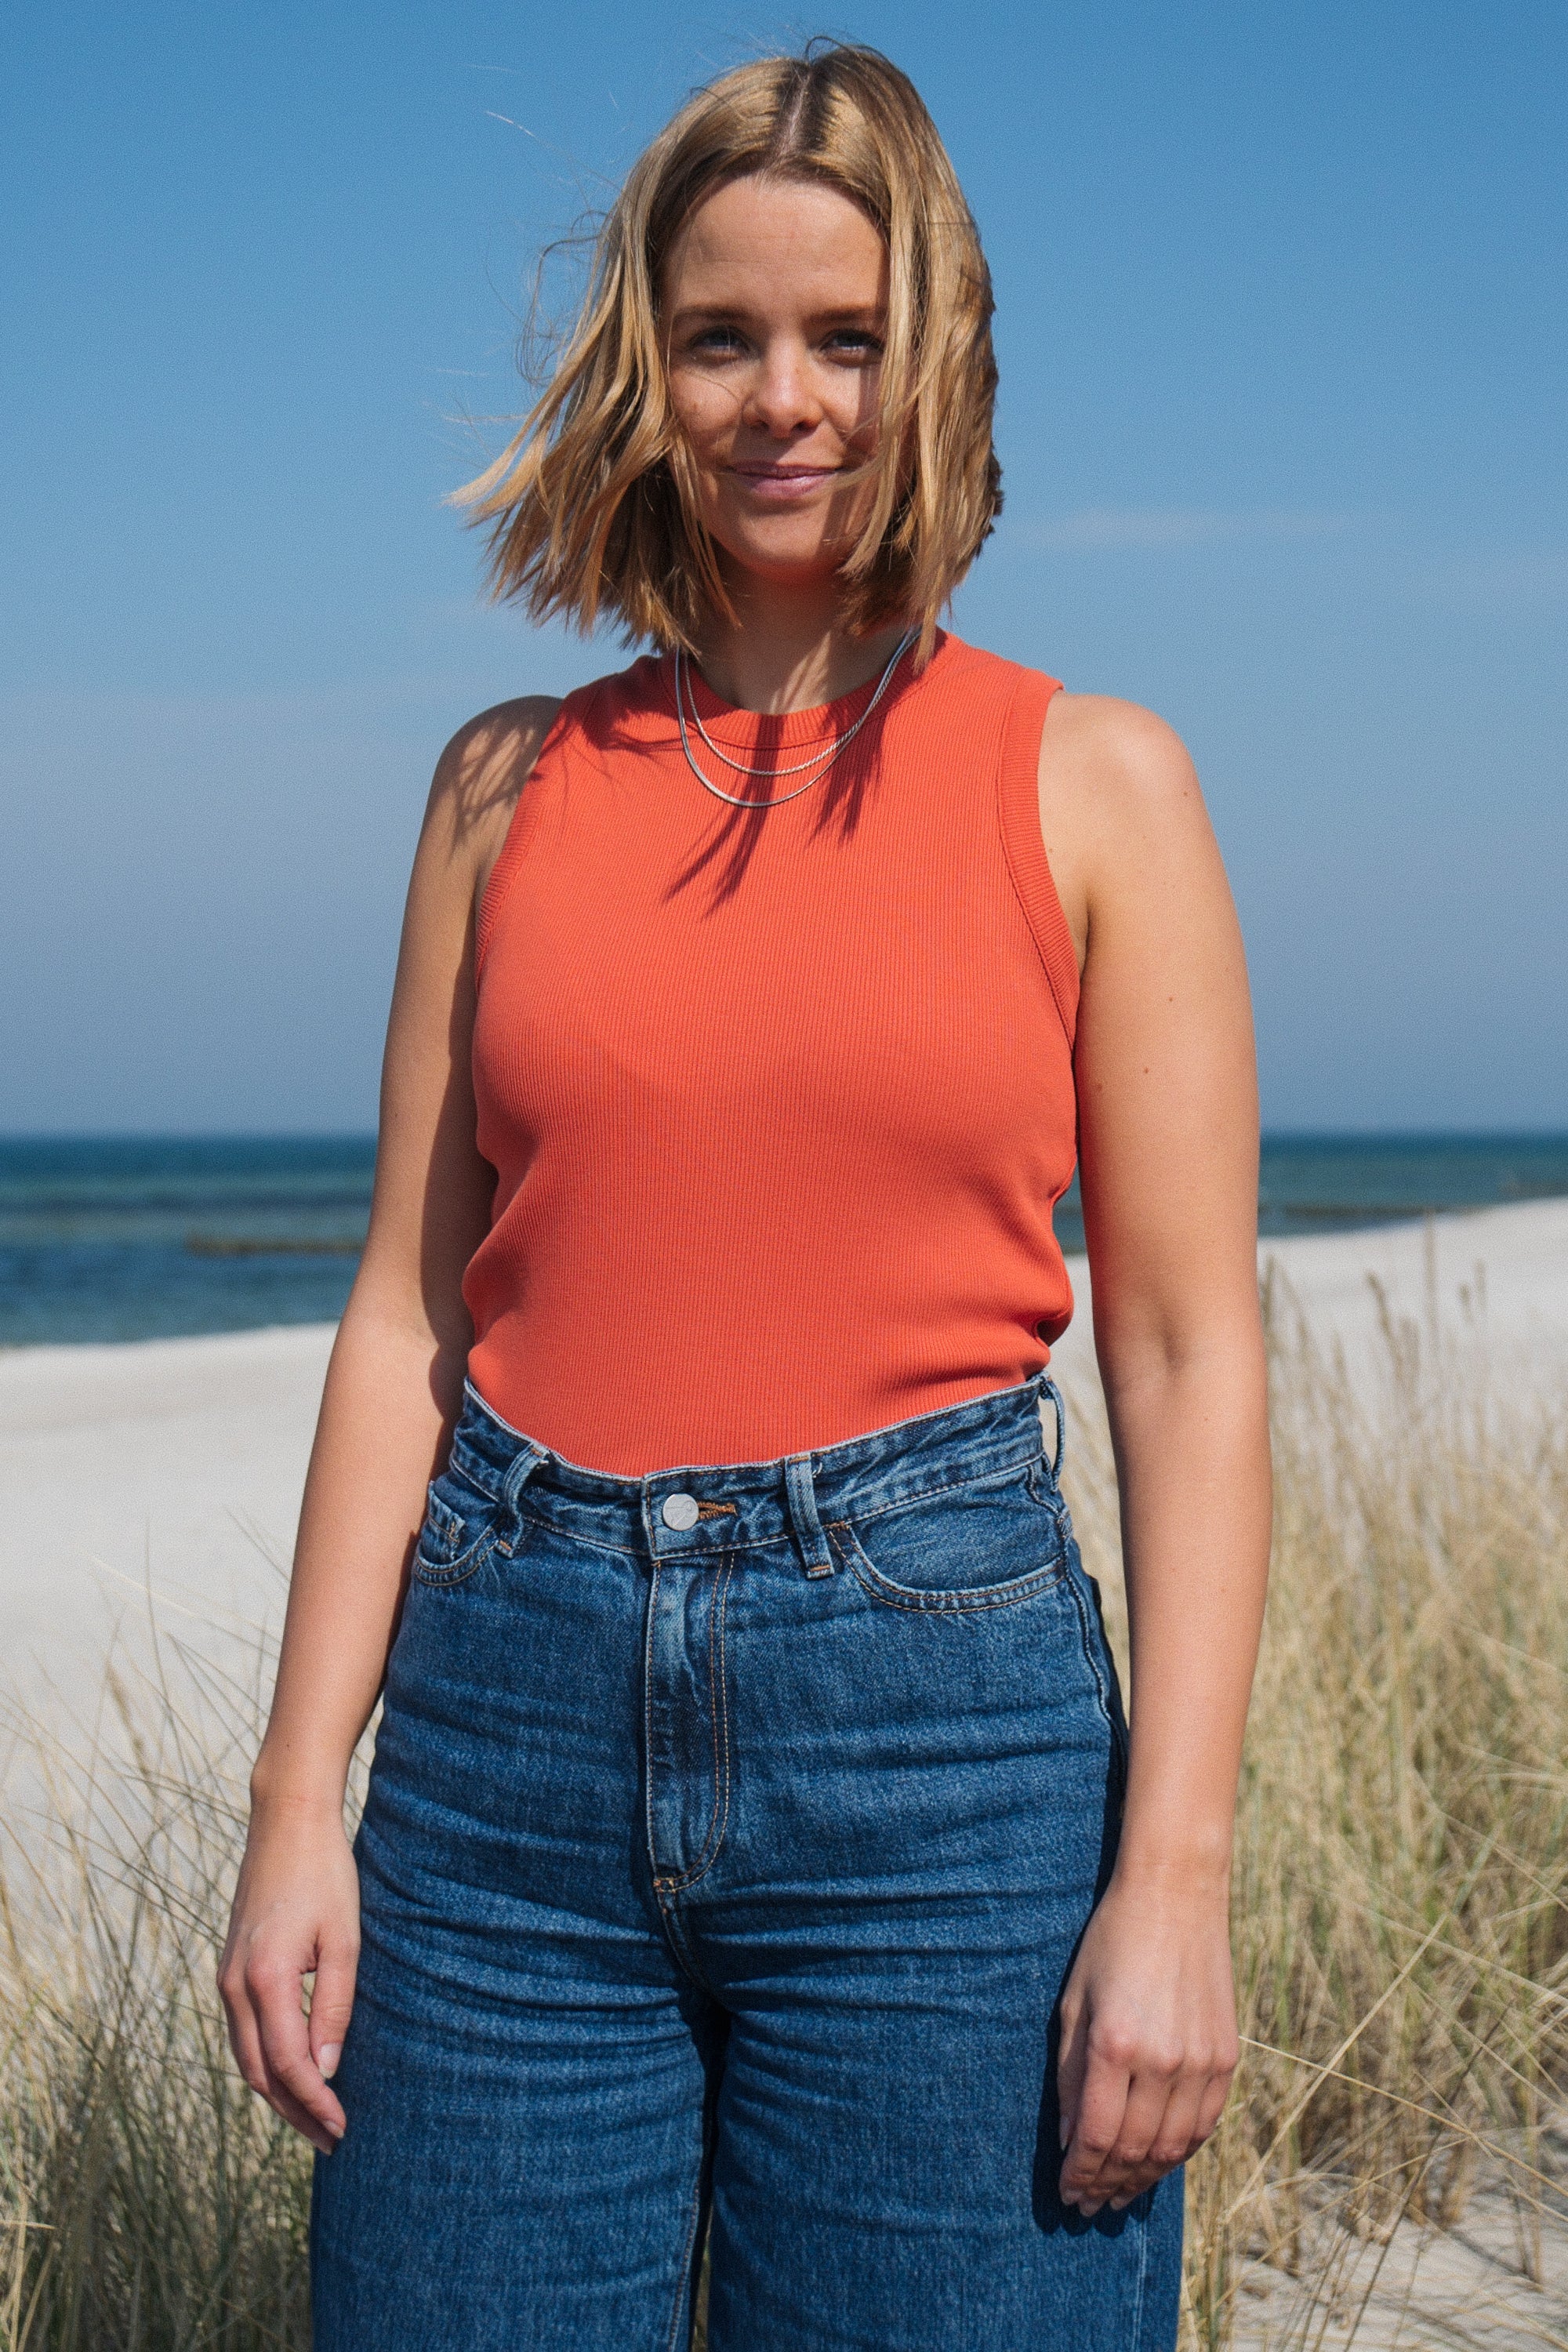 Top Alva Orange by Saltwater made from organic cotton